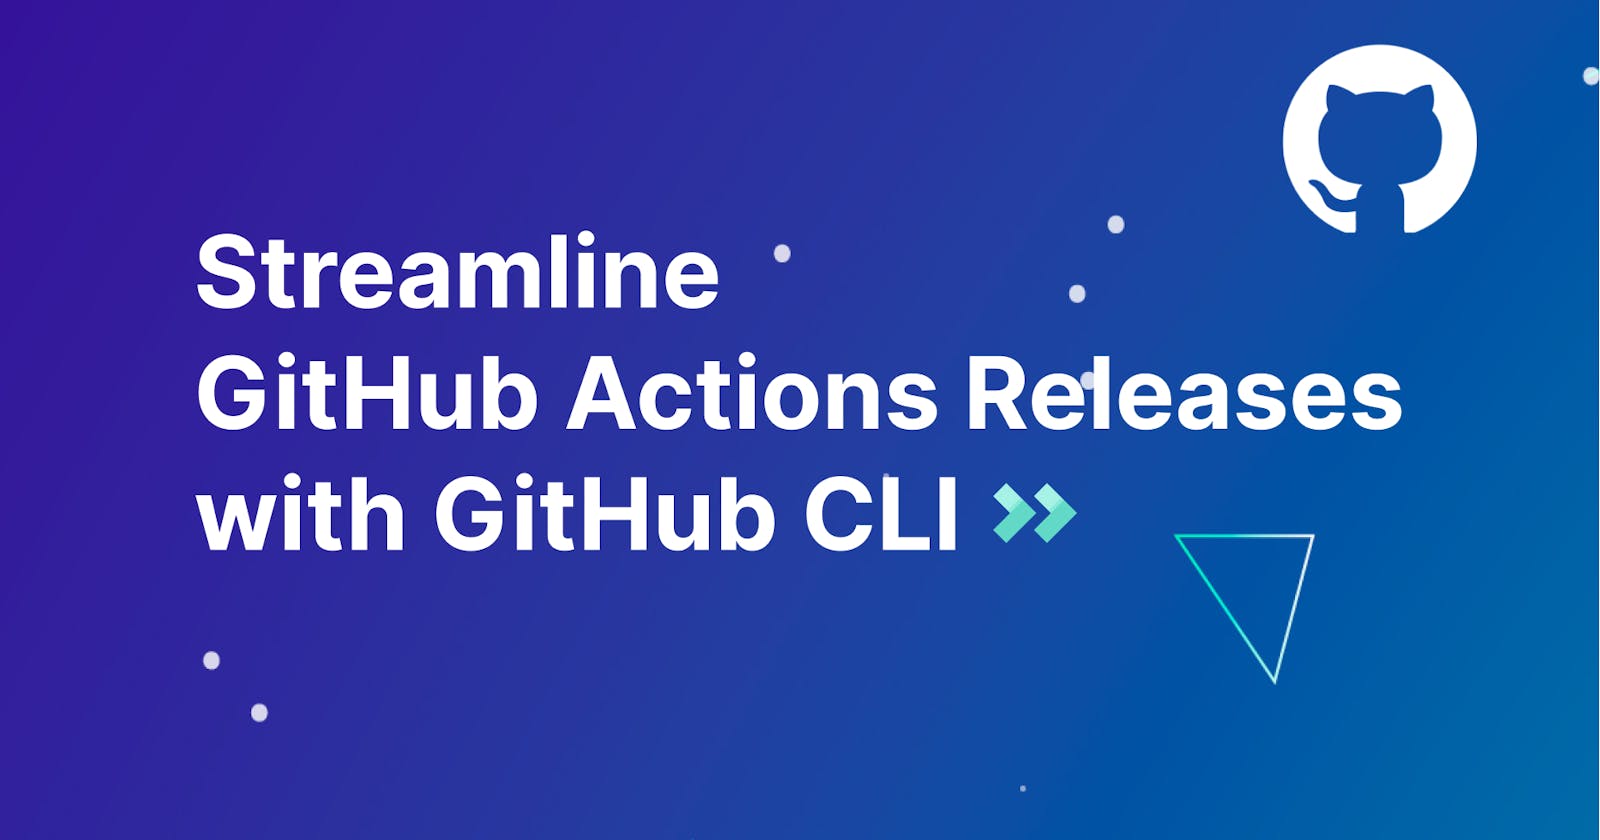 Streamline Github Actions Releases with Github CLI